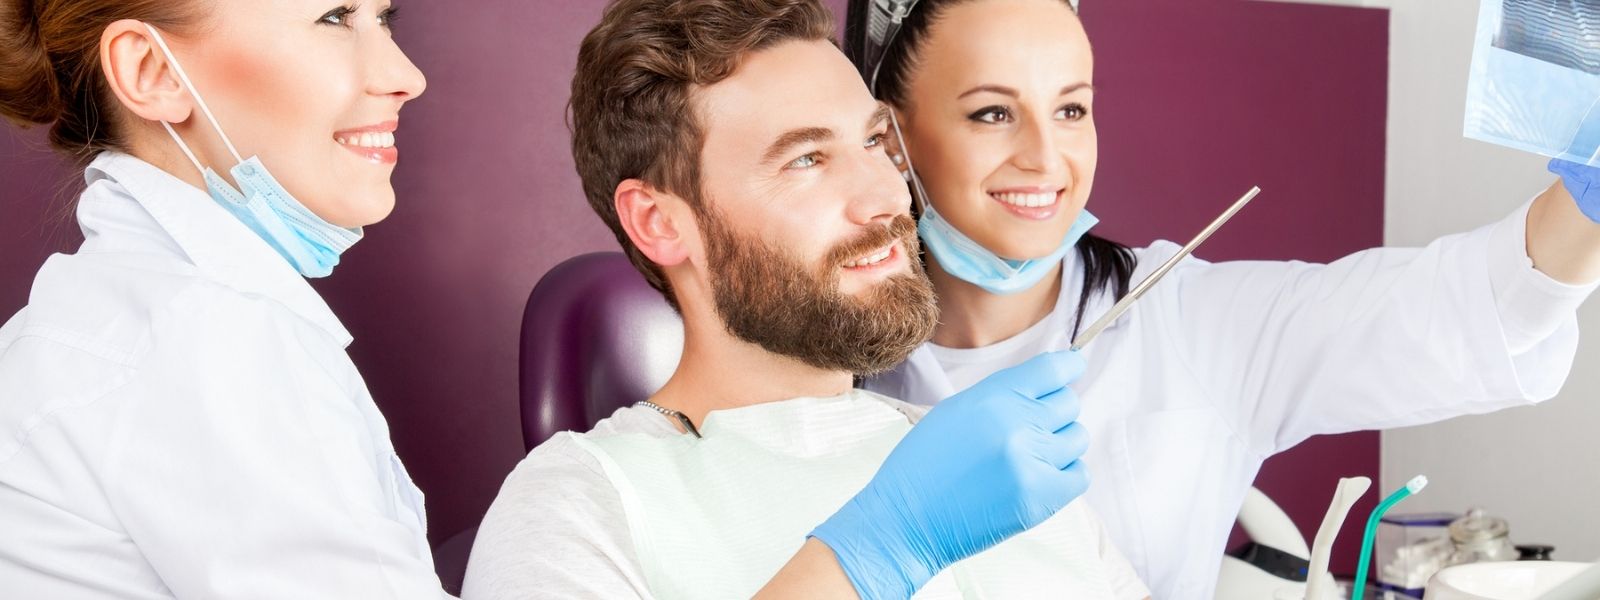 Dental patient with two dentists